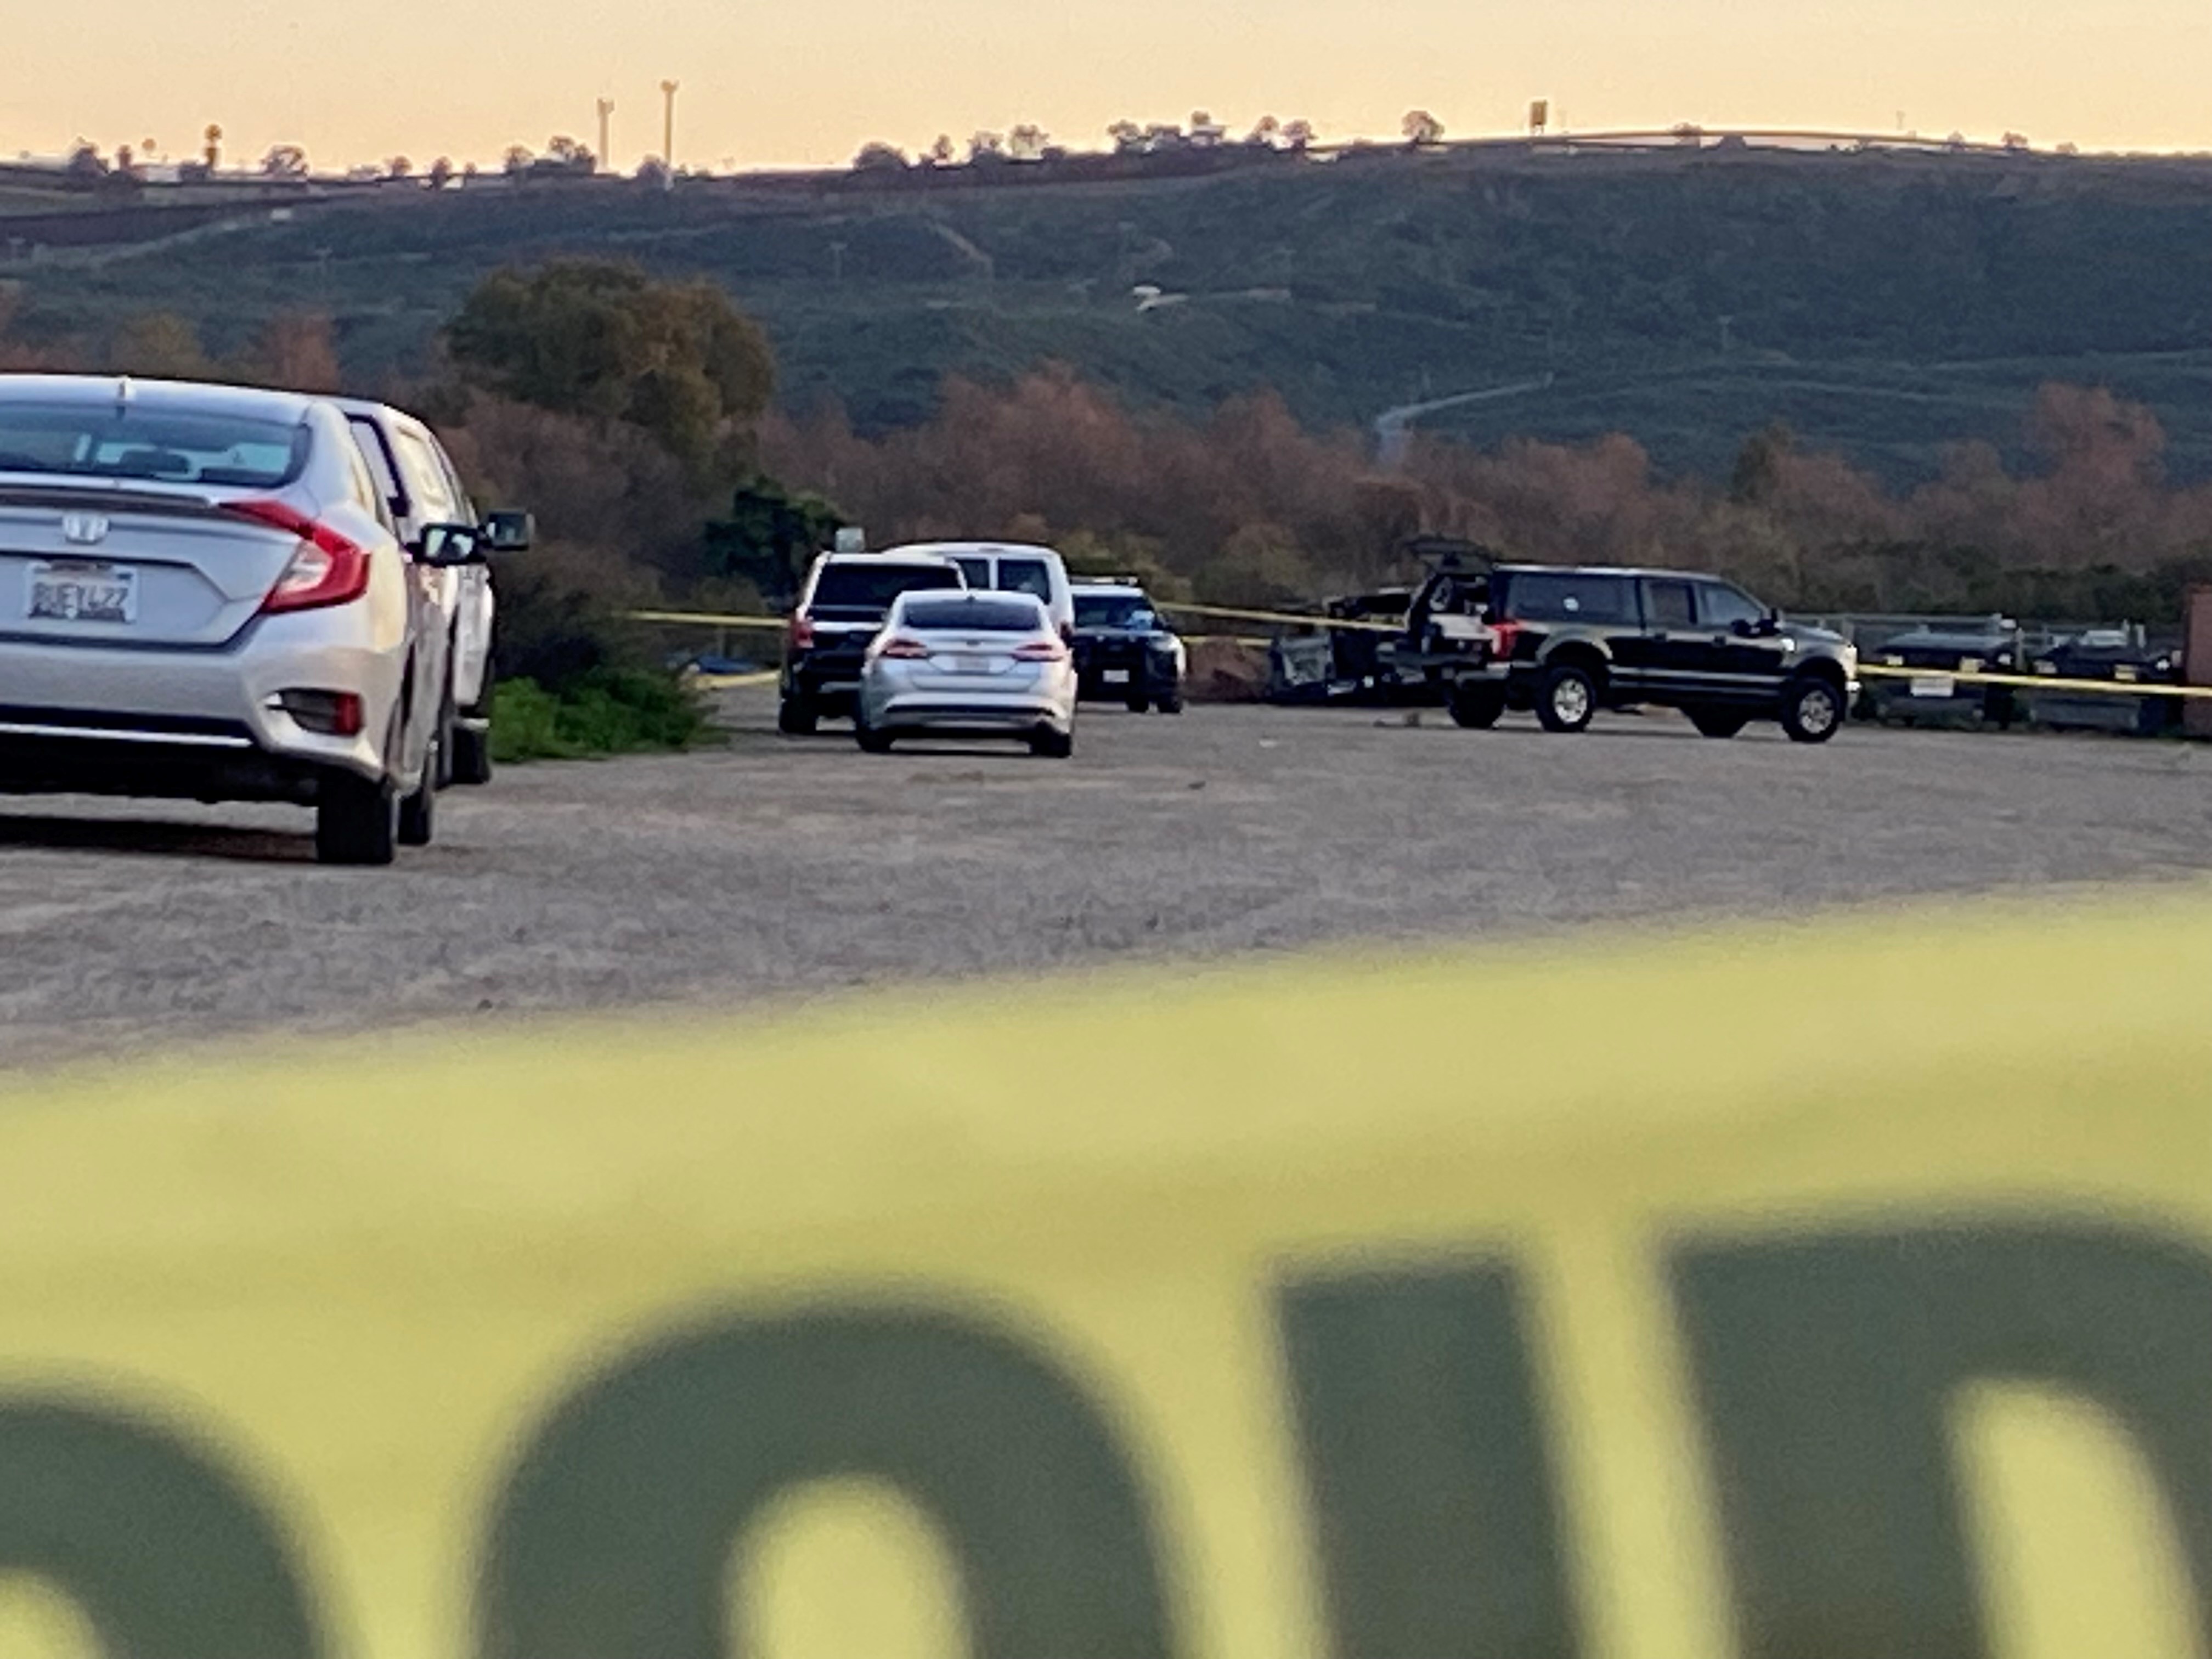 A body was found partially inside, partially outside a burning van near the Tijuana River Valley Sports Complex. (NBC 7 San Diego)